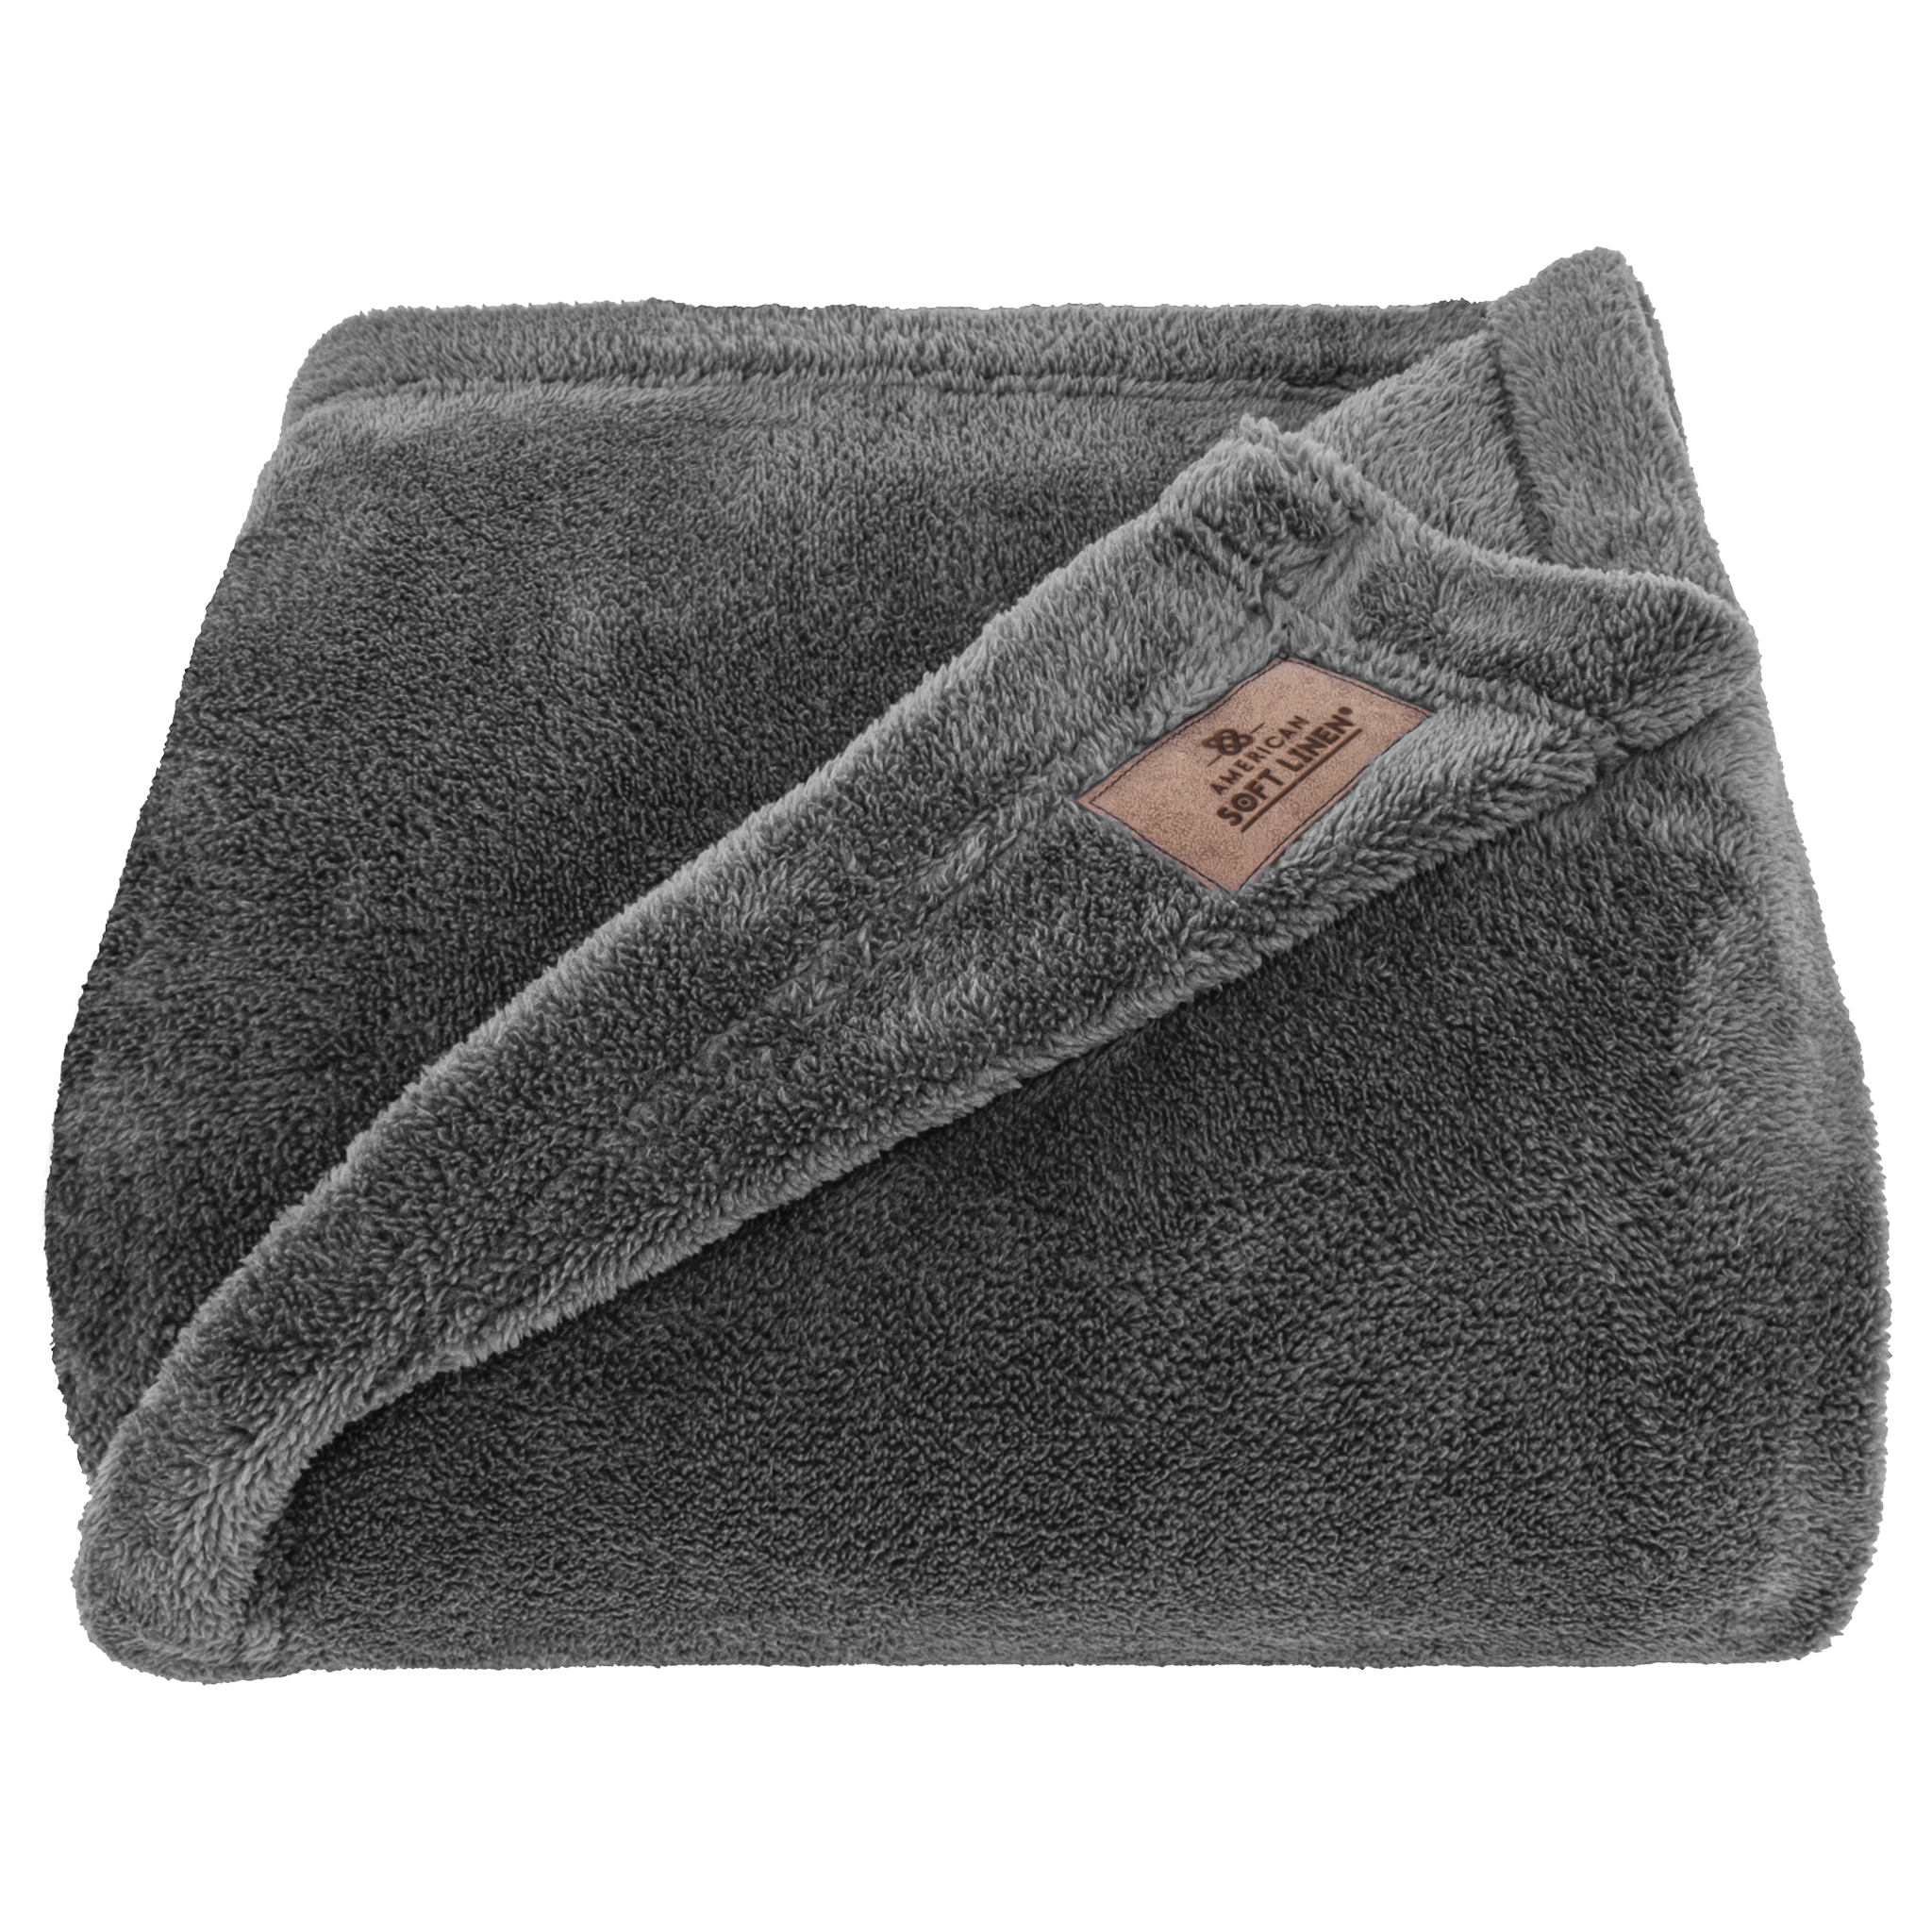 American Soft Linen - Bedding Fleece Blanket - Wholesale - 15 Set Case Pack - Twin Size 60x80 inches - Gray - 3